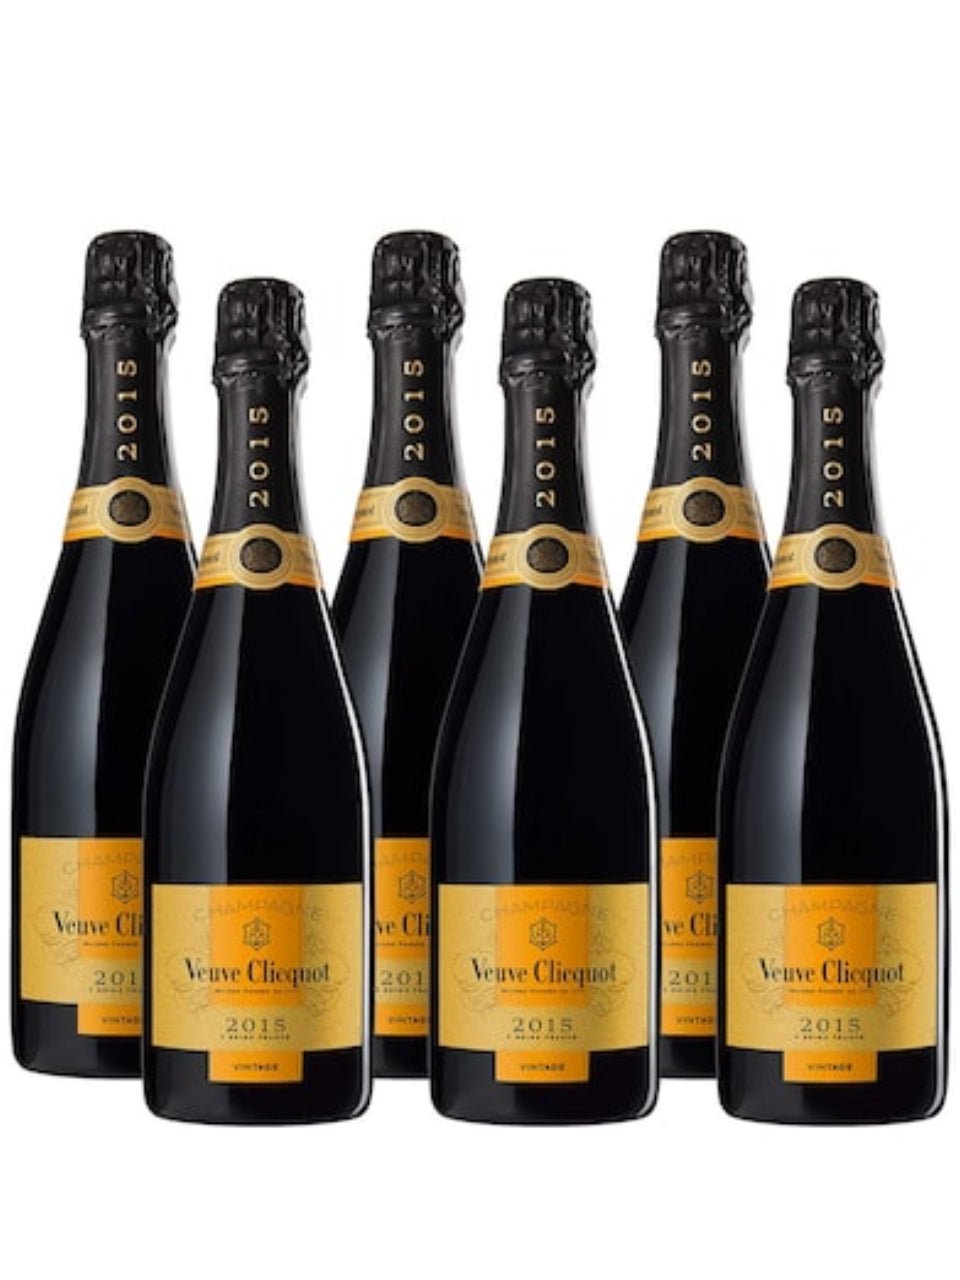 Veuve Clicquot Ponsardin Brut Vintage Champagne Collection - Case of 6 | Exquisite Wine & Alcohol Gift Delivery Toronto Canada | Vyno